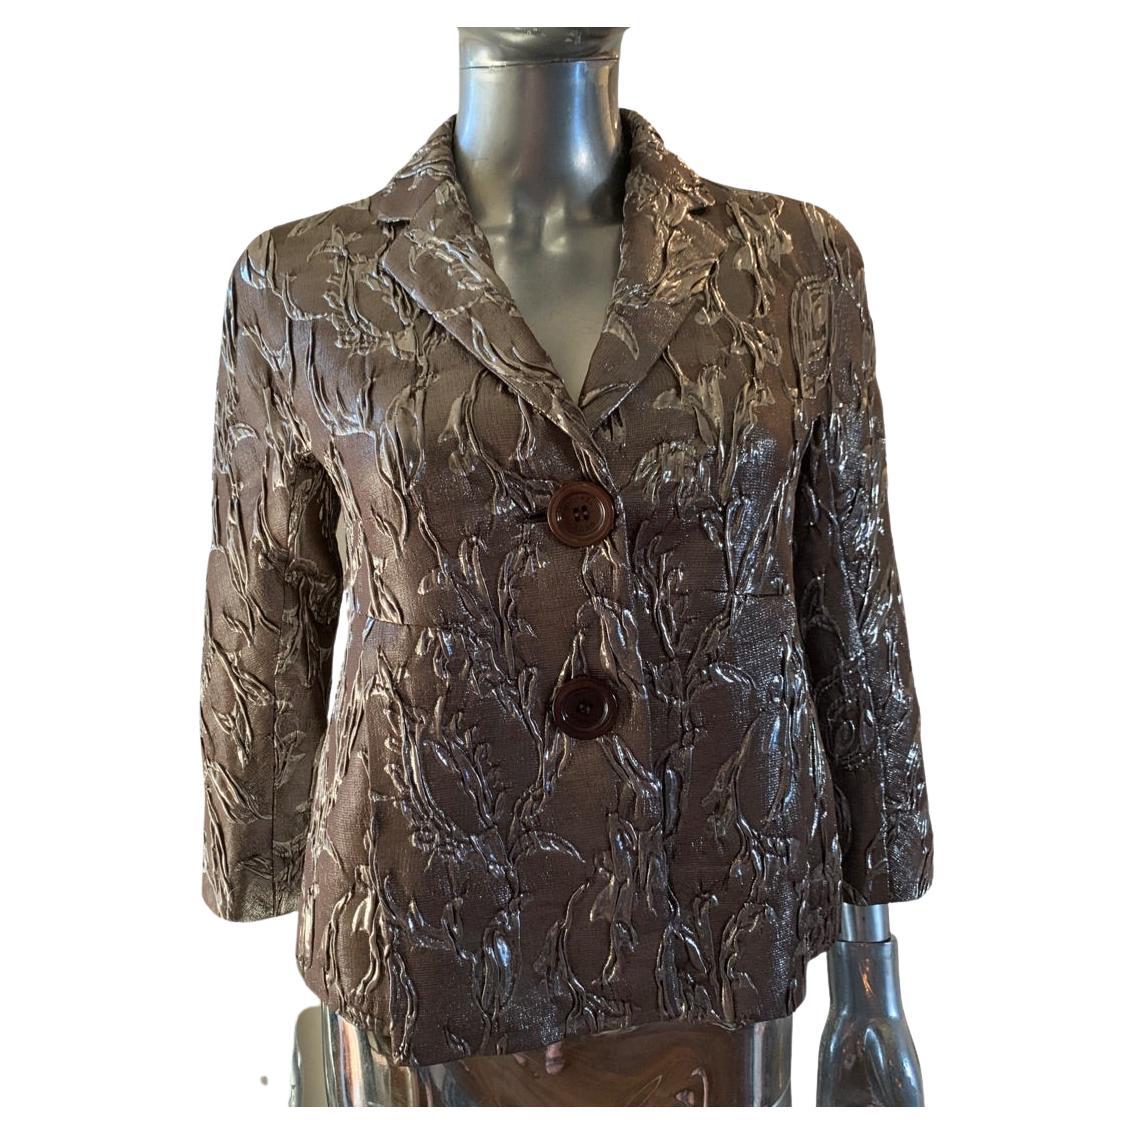 Michael Kors Collection Italy Metallic Embossed Floral Jacket Size 6